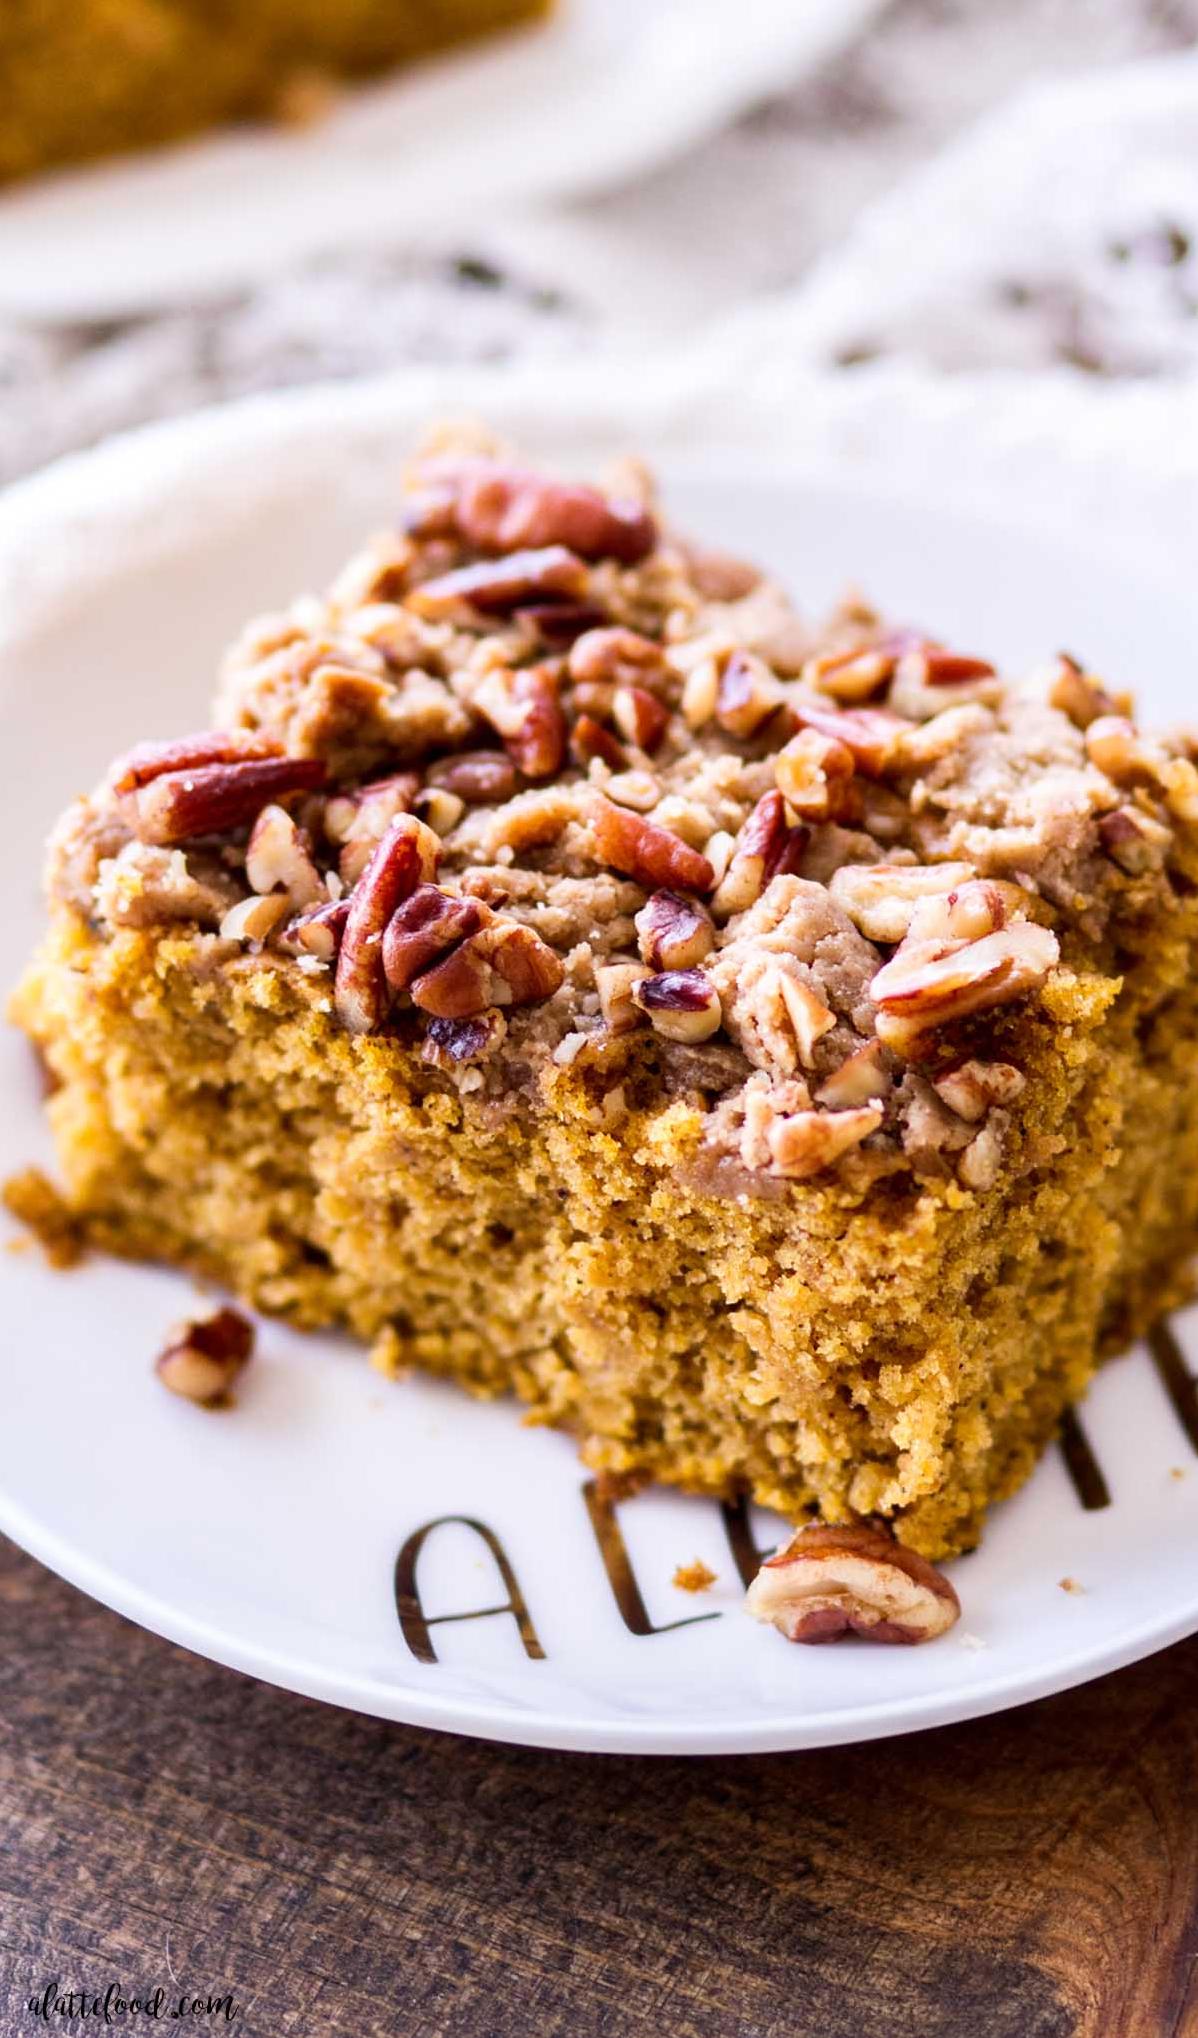  Get ready to fall in love with this Pumpkin Pecan Coffee Cake.